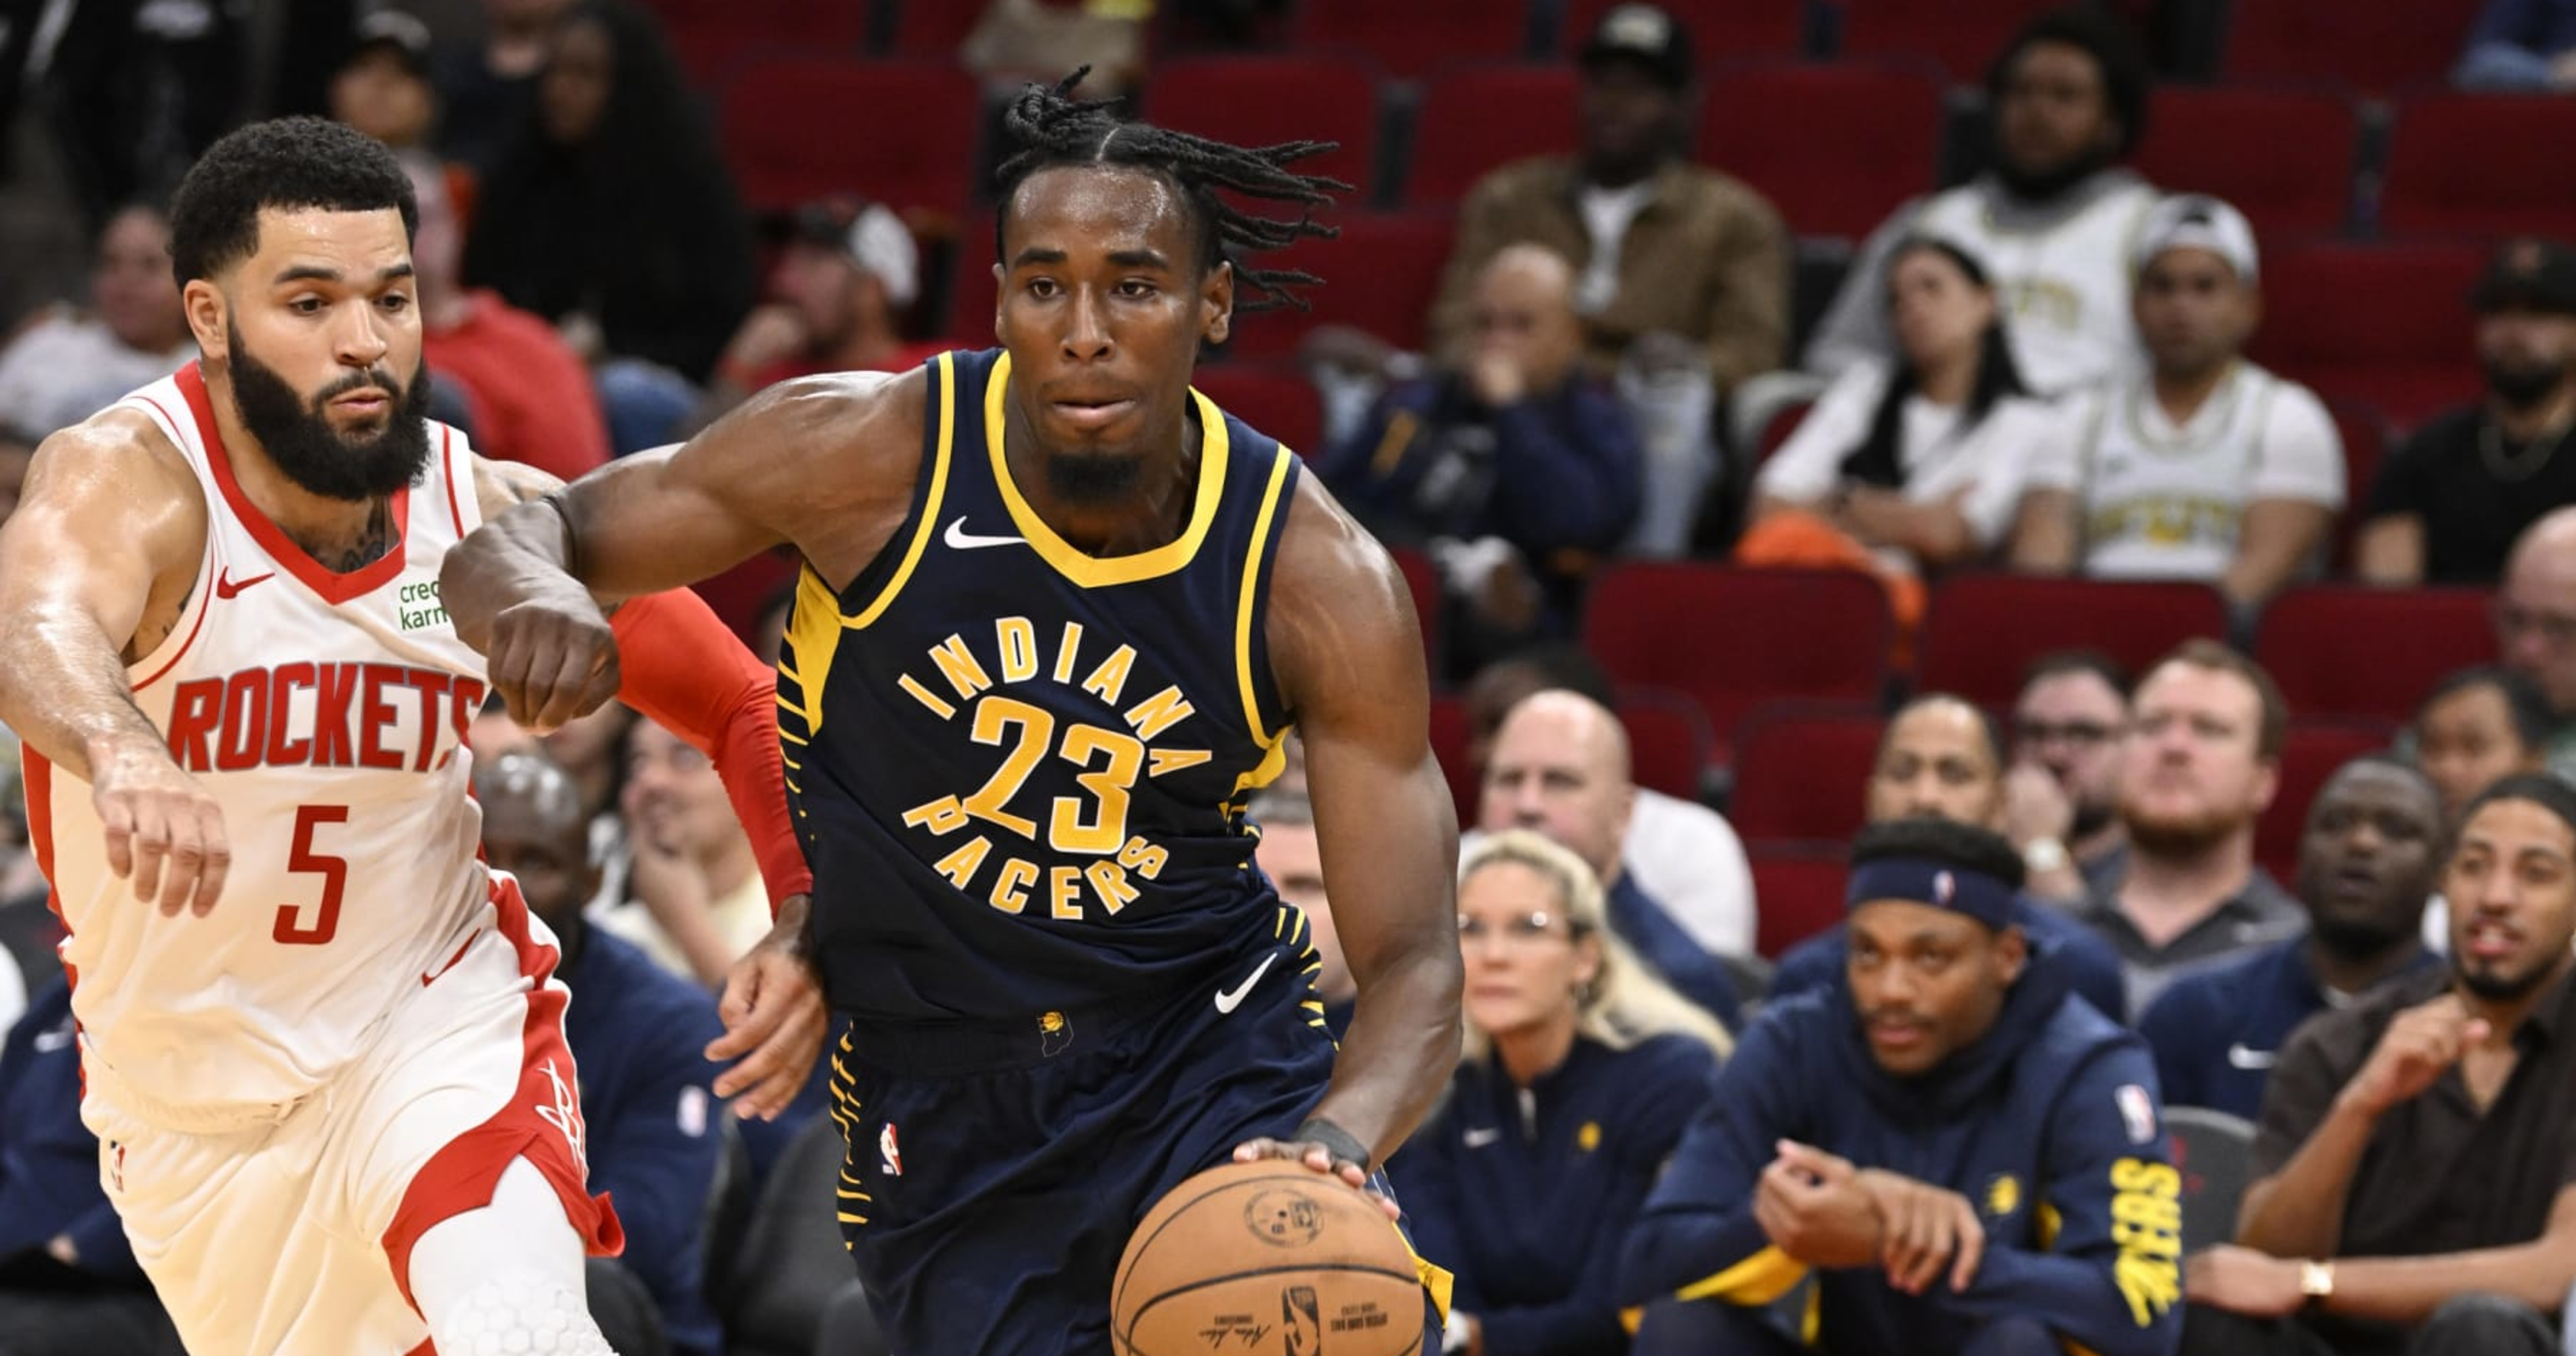 Five Indiana Pacers players are eligible for contract extensions.